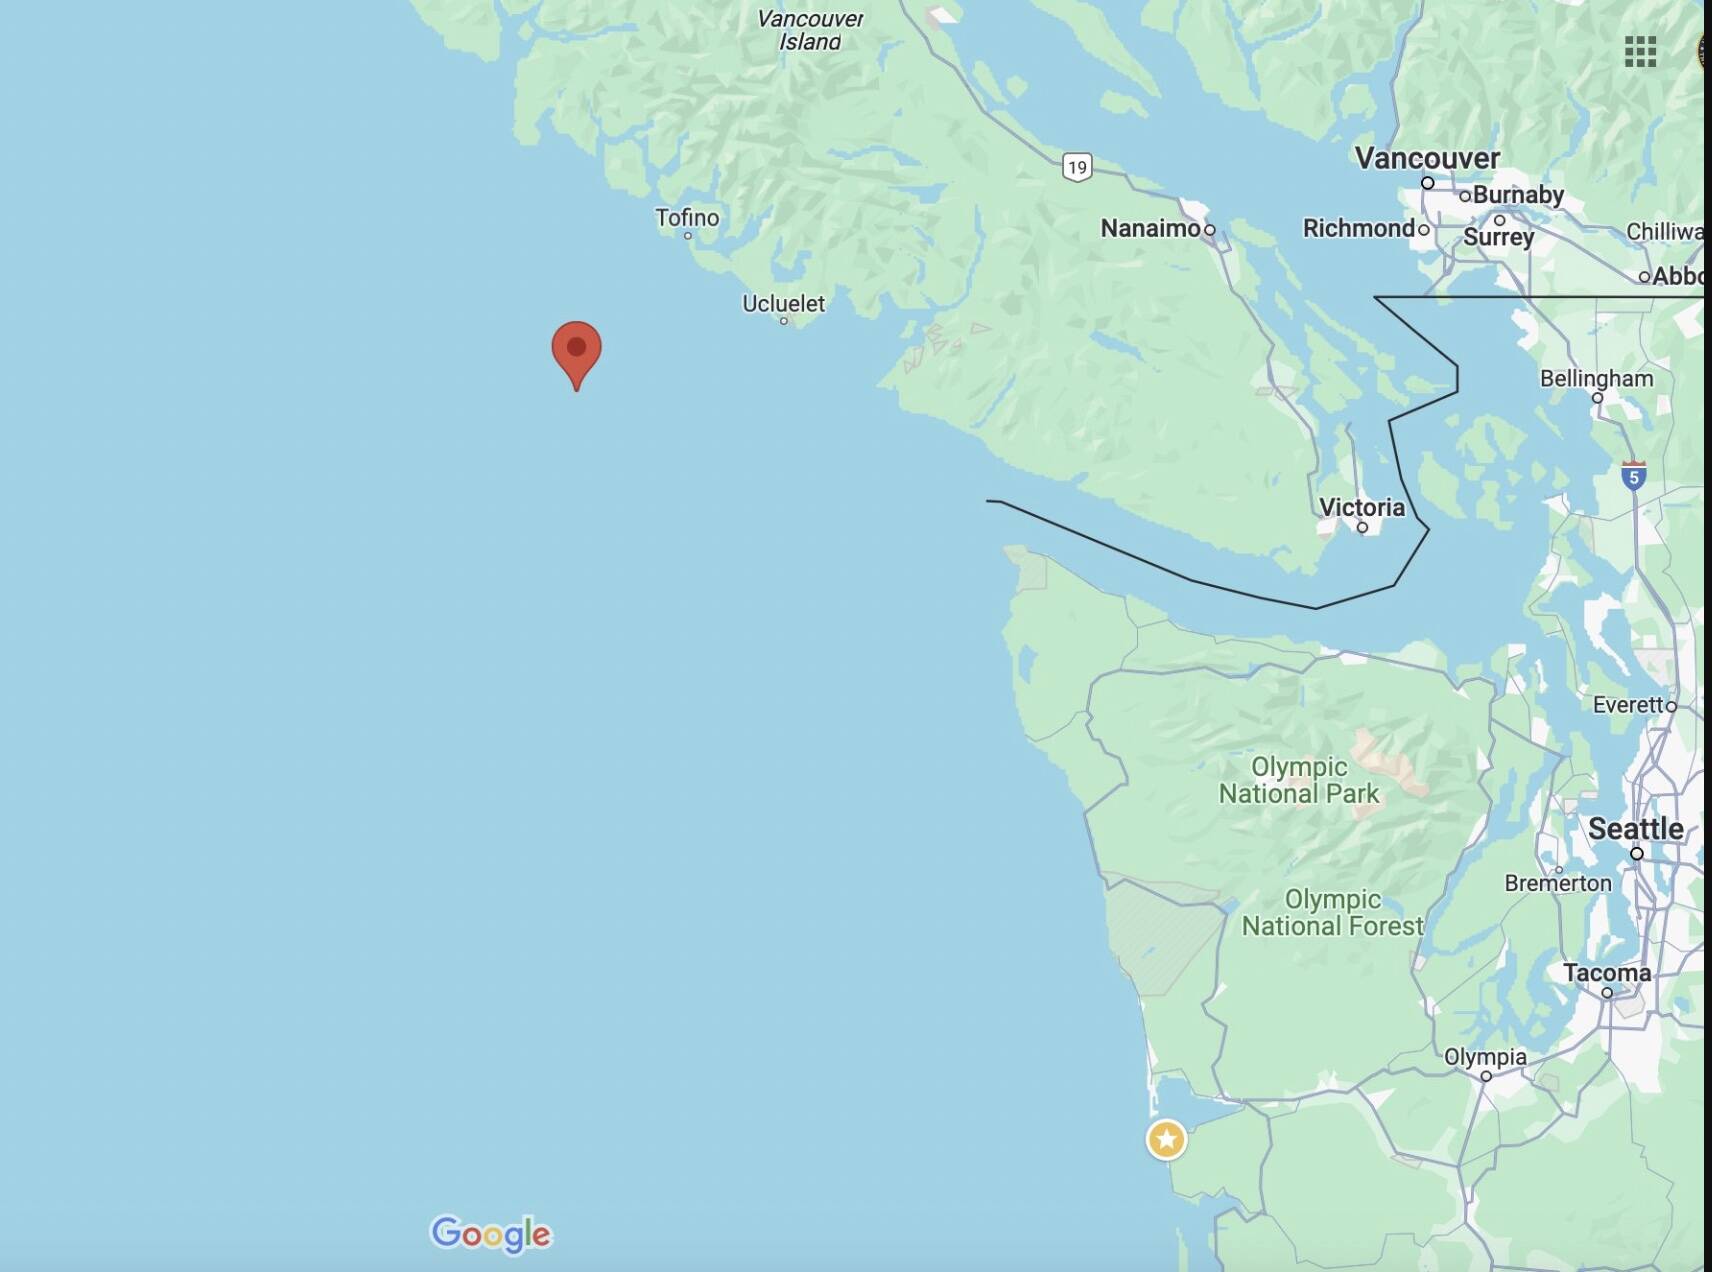 (U.S. Coast Guard Pacific Northwest) A red pin marks the rough location of where the missing fisherman was found alive in a life raft the morning of Oct. 26, two weeks after leaving Westport in the fishing vessel Evening.